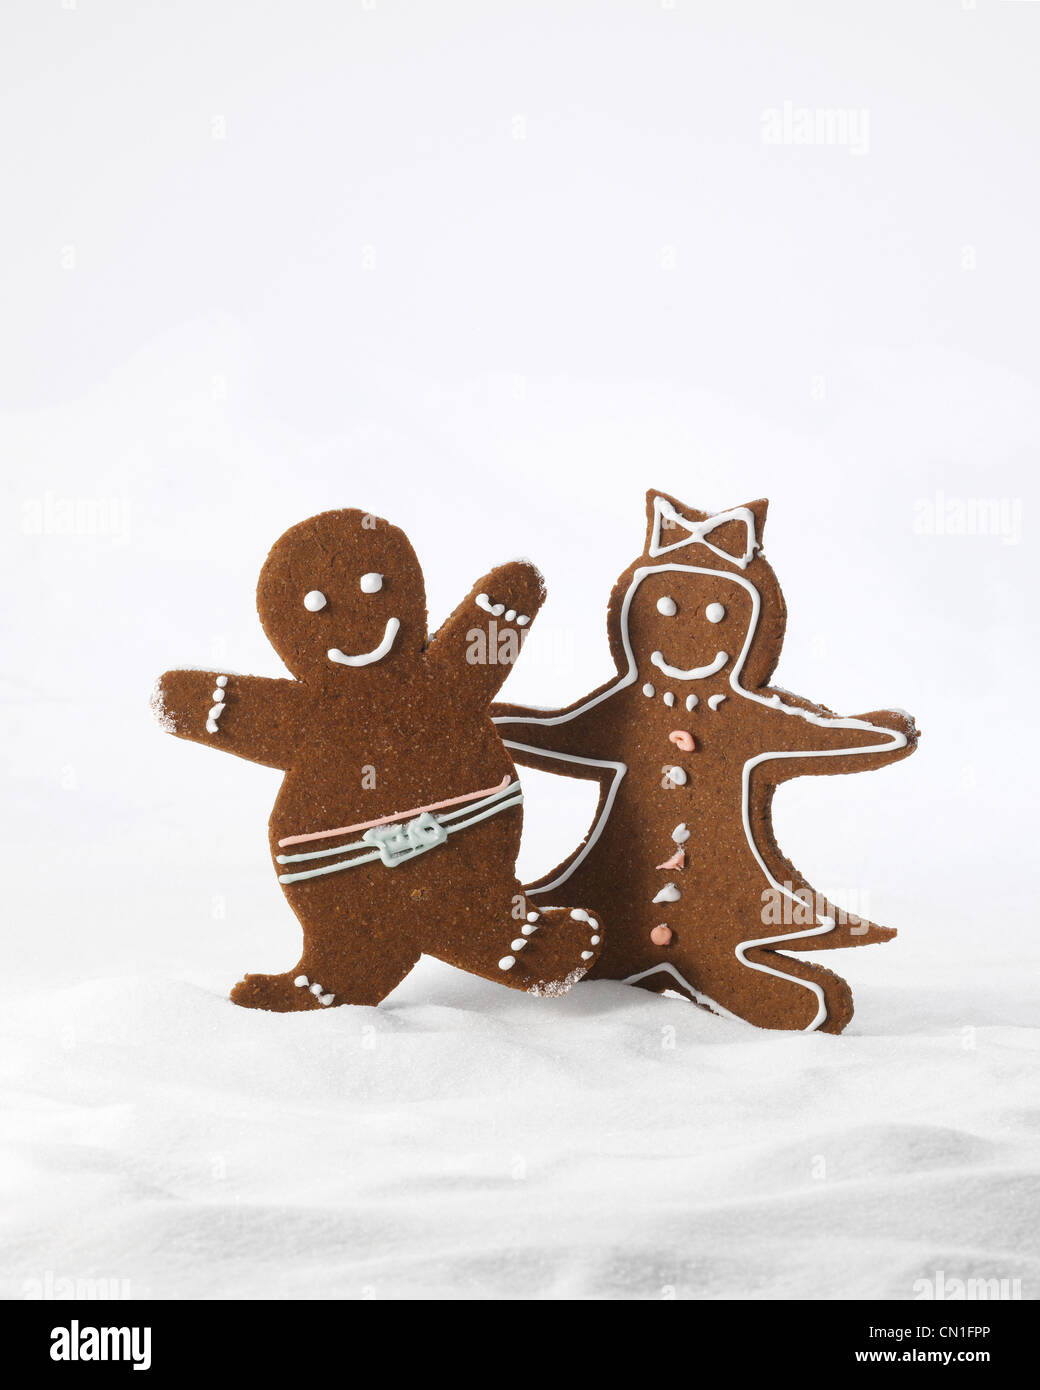 Gingerbread Couple Standing in Snow Stock Photo